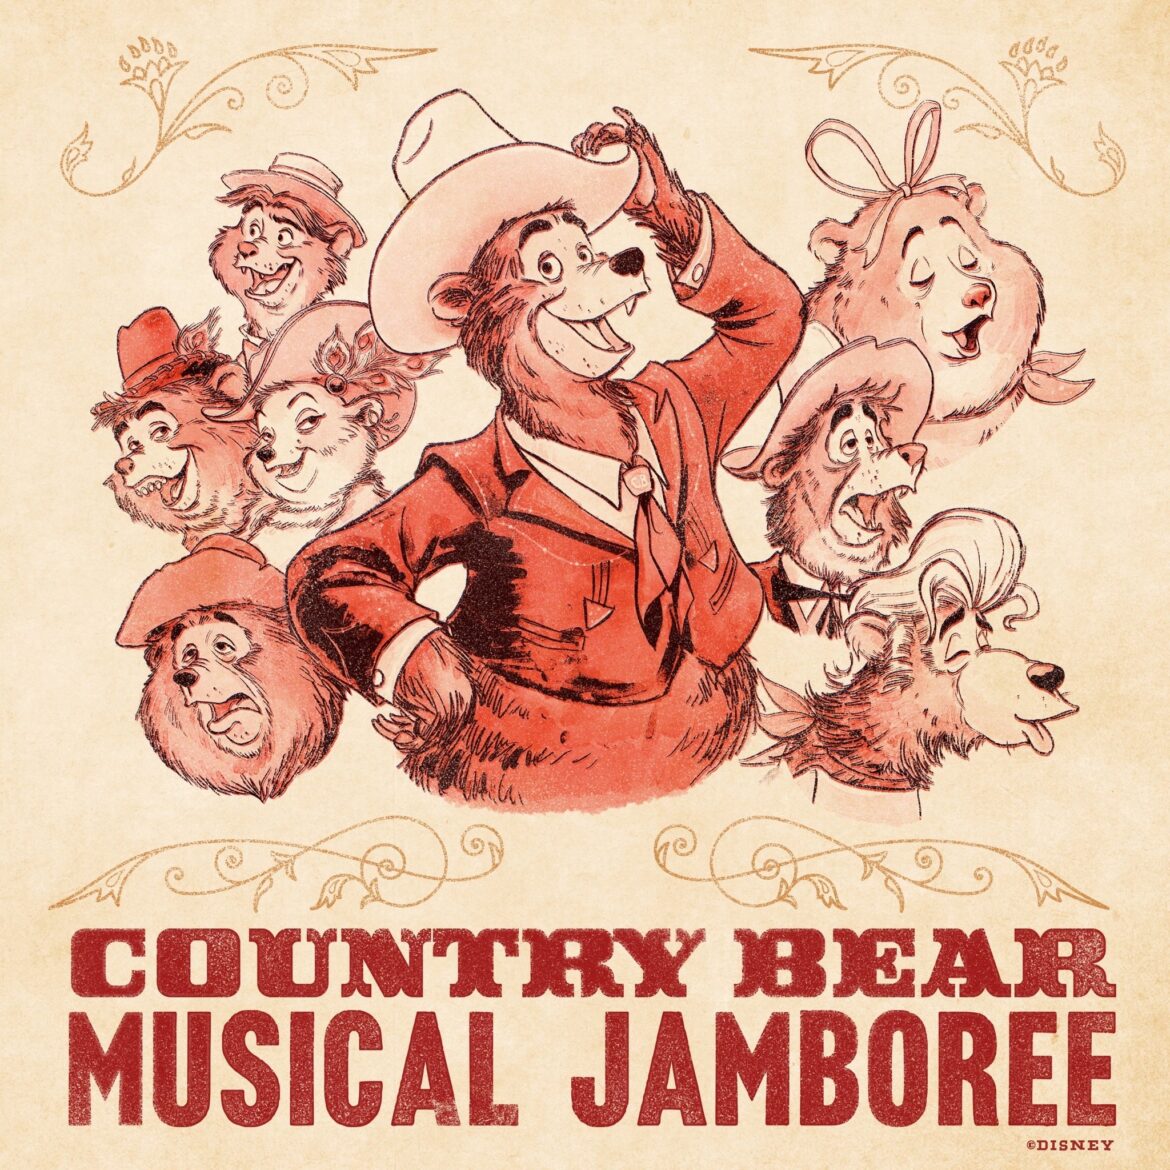 Country Bear Musical Jamboree Soundtrack Now Available on Music Streaming Platforms!